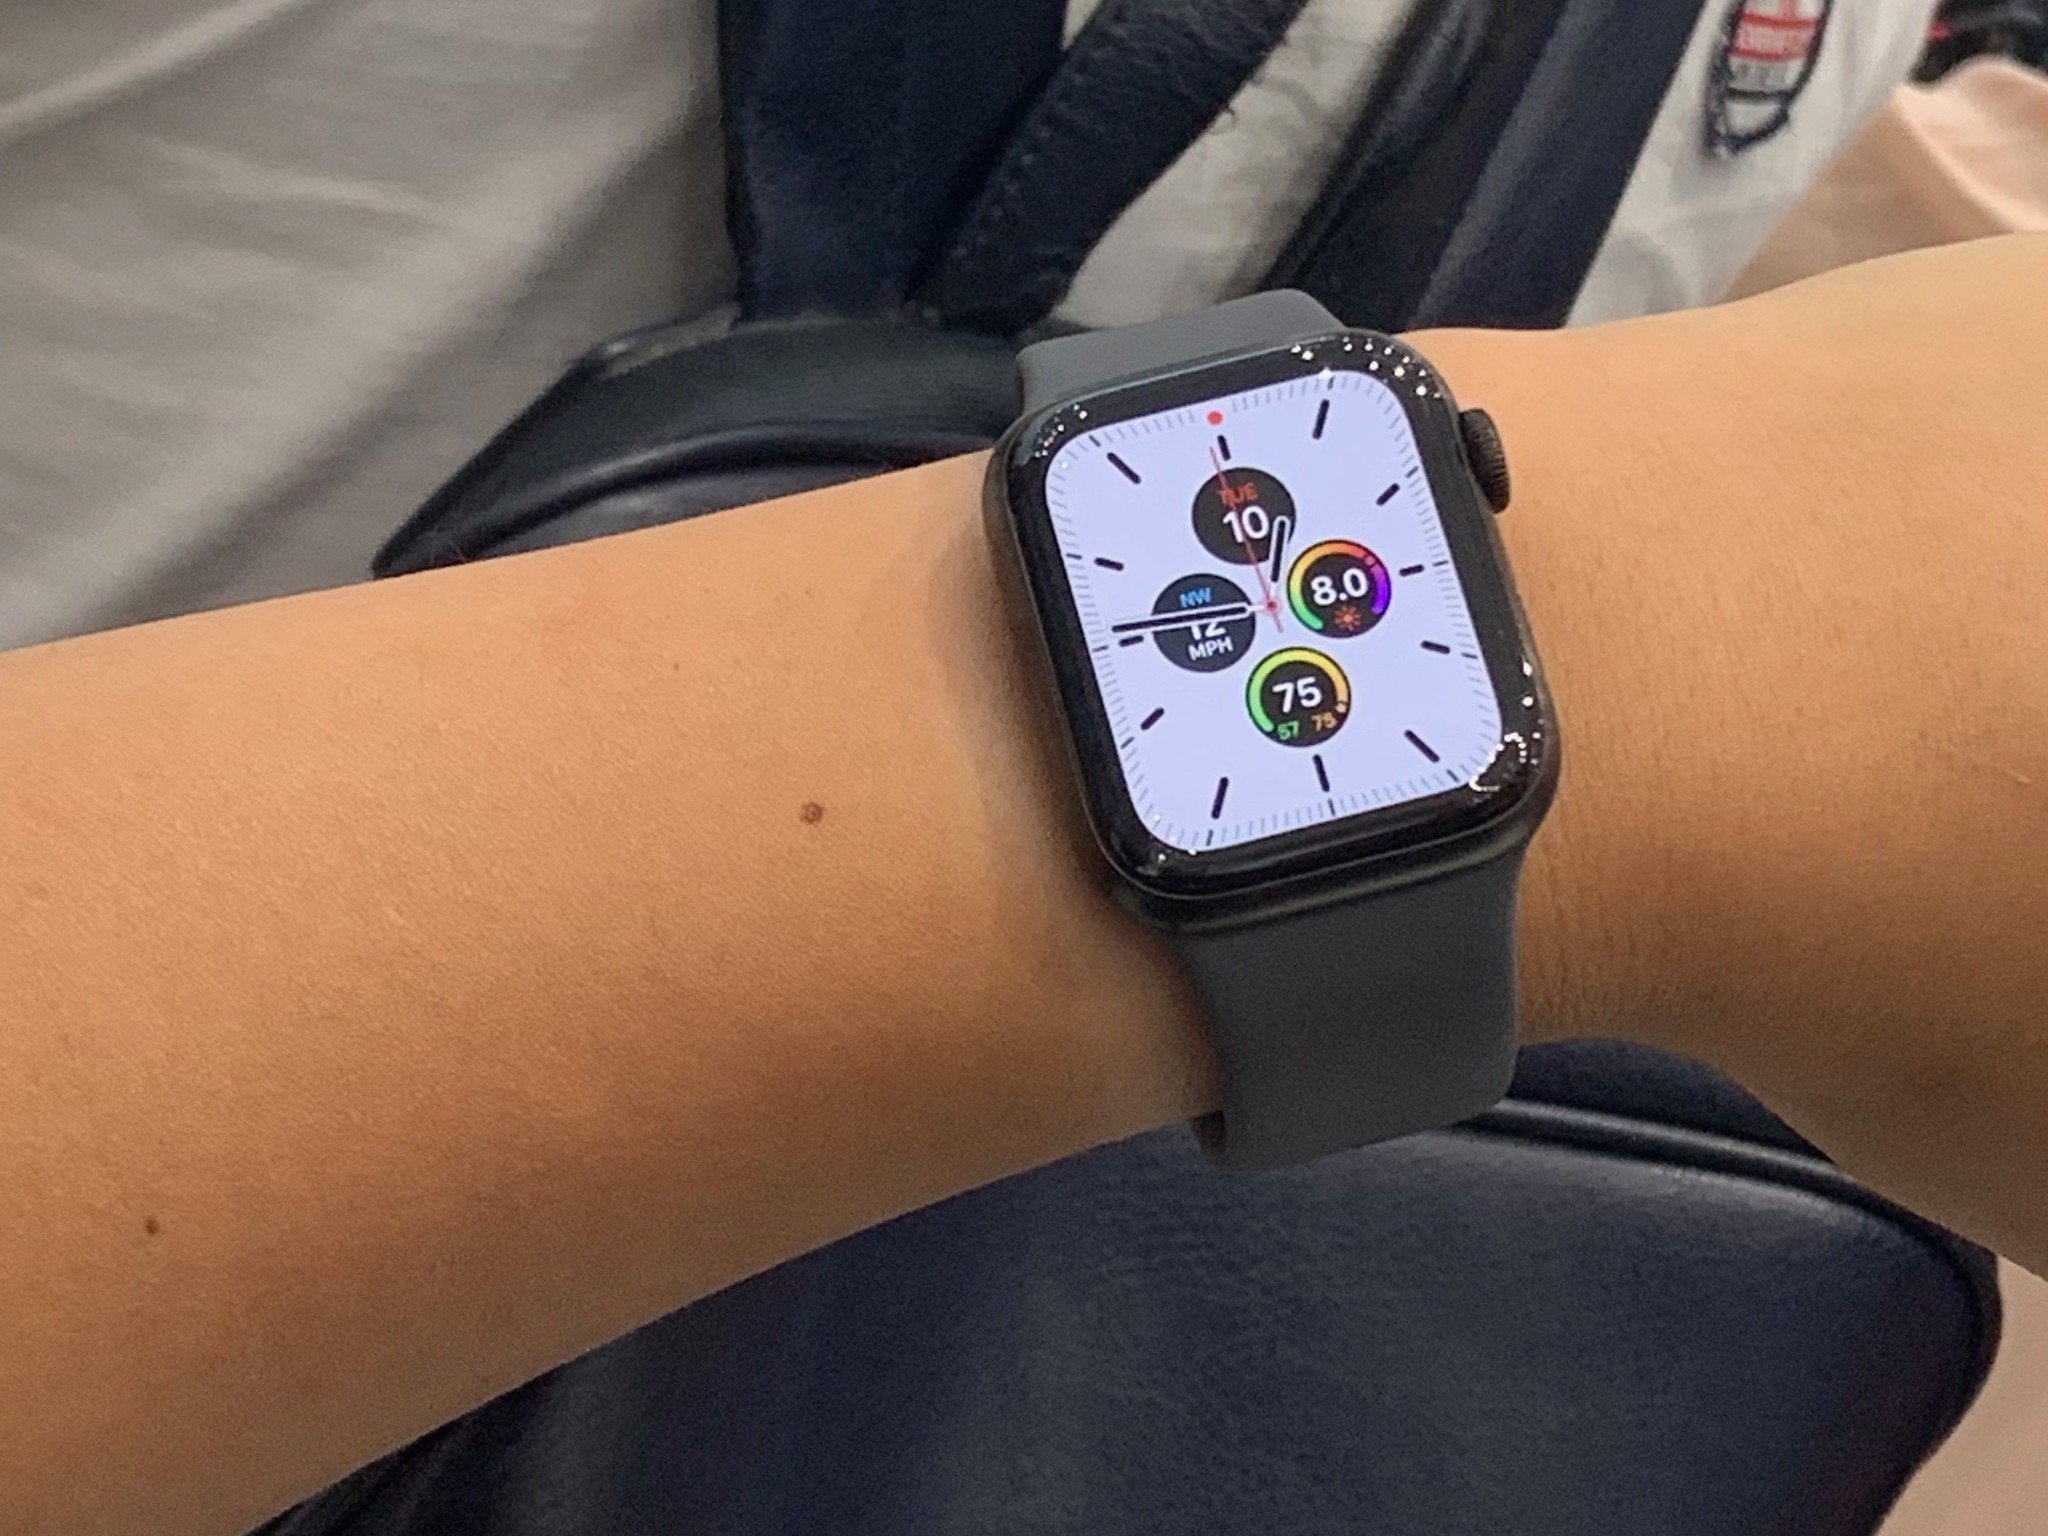 Flipboard: The Apple Watch Series 5 appears to be using same CPU as the